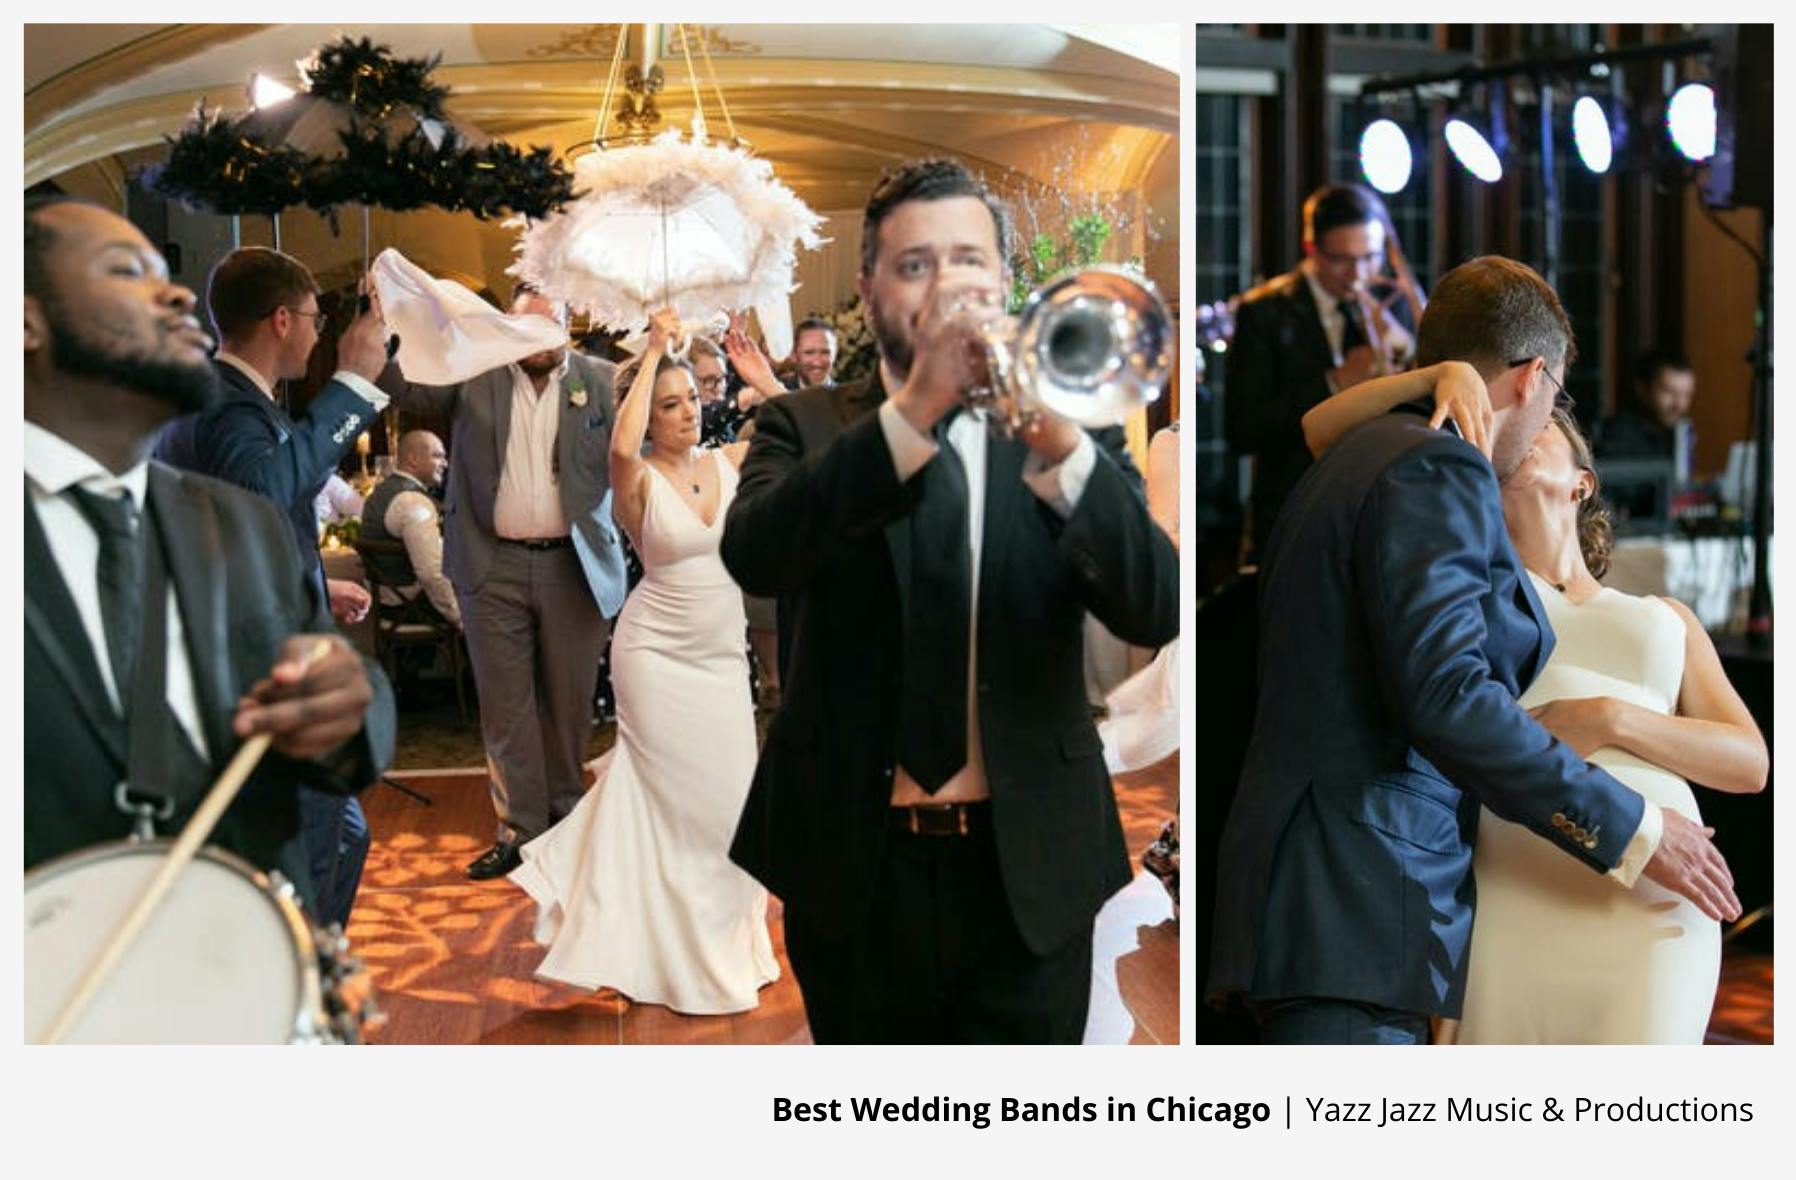 Yazz Jazz Music & Productions Singing and Playing Through the Wedding Guest Crowd at Chicago Wedding With Bride and From Dancing | PartySlate